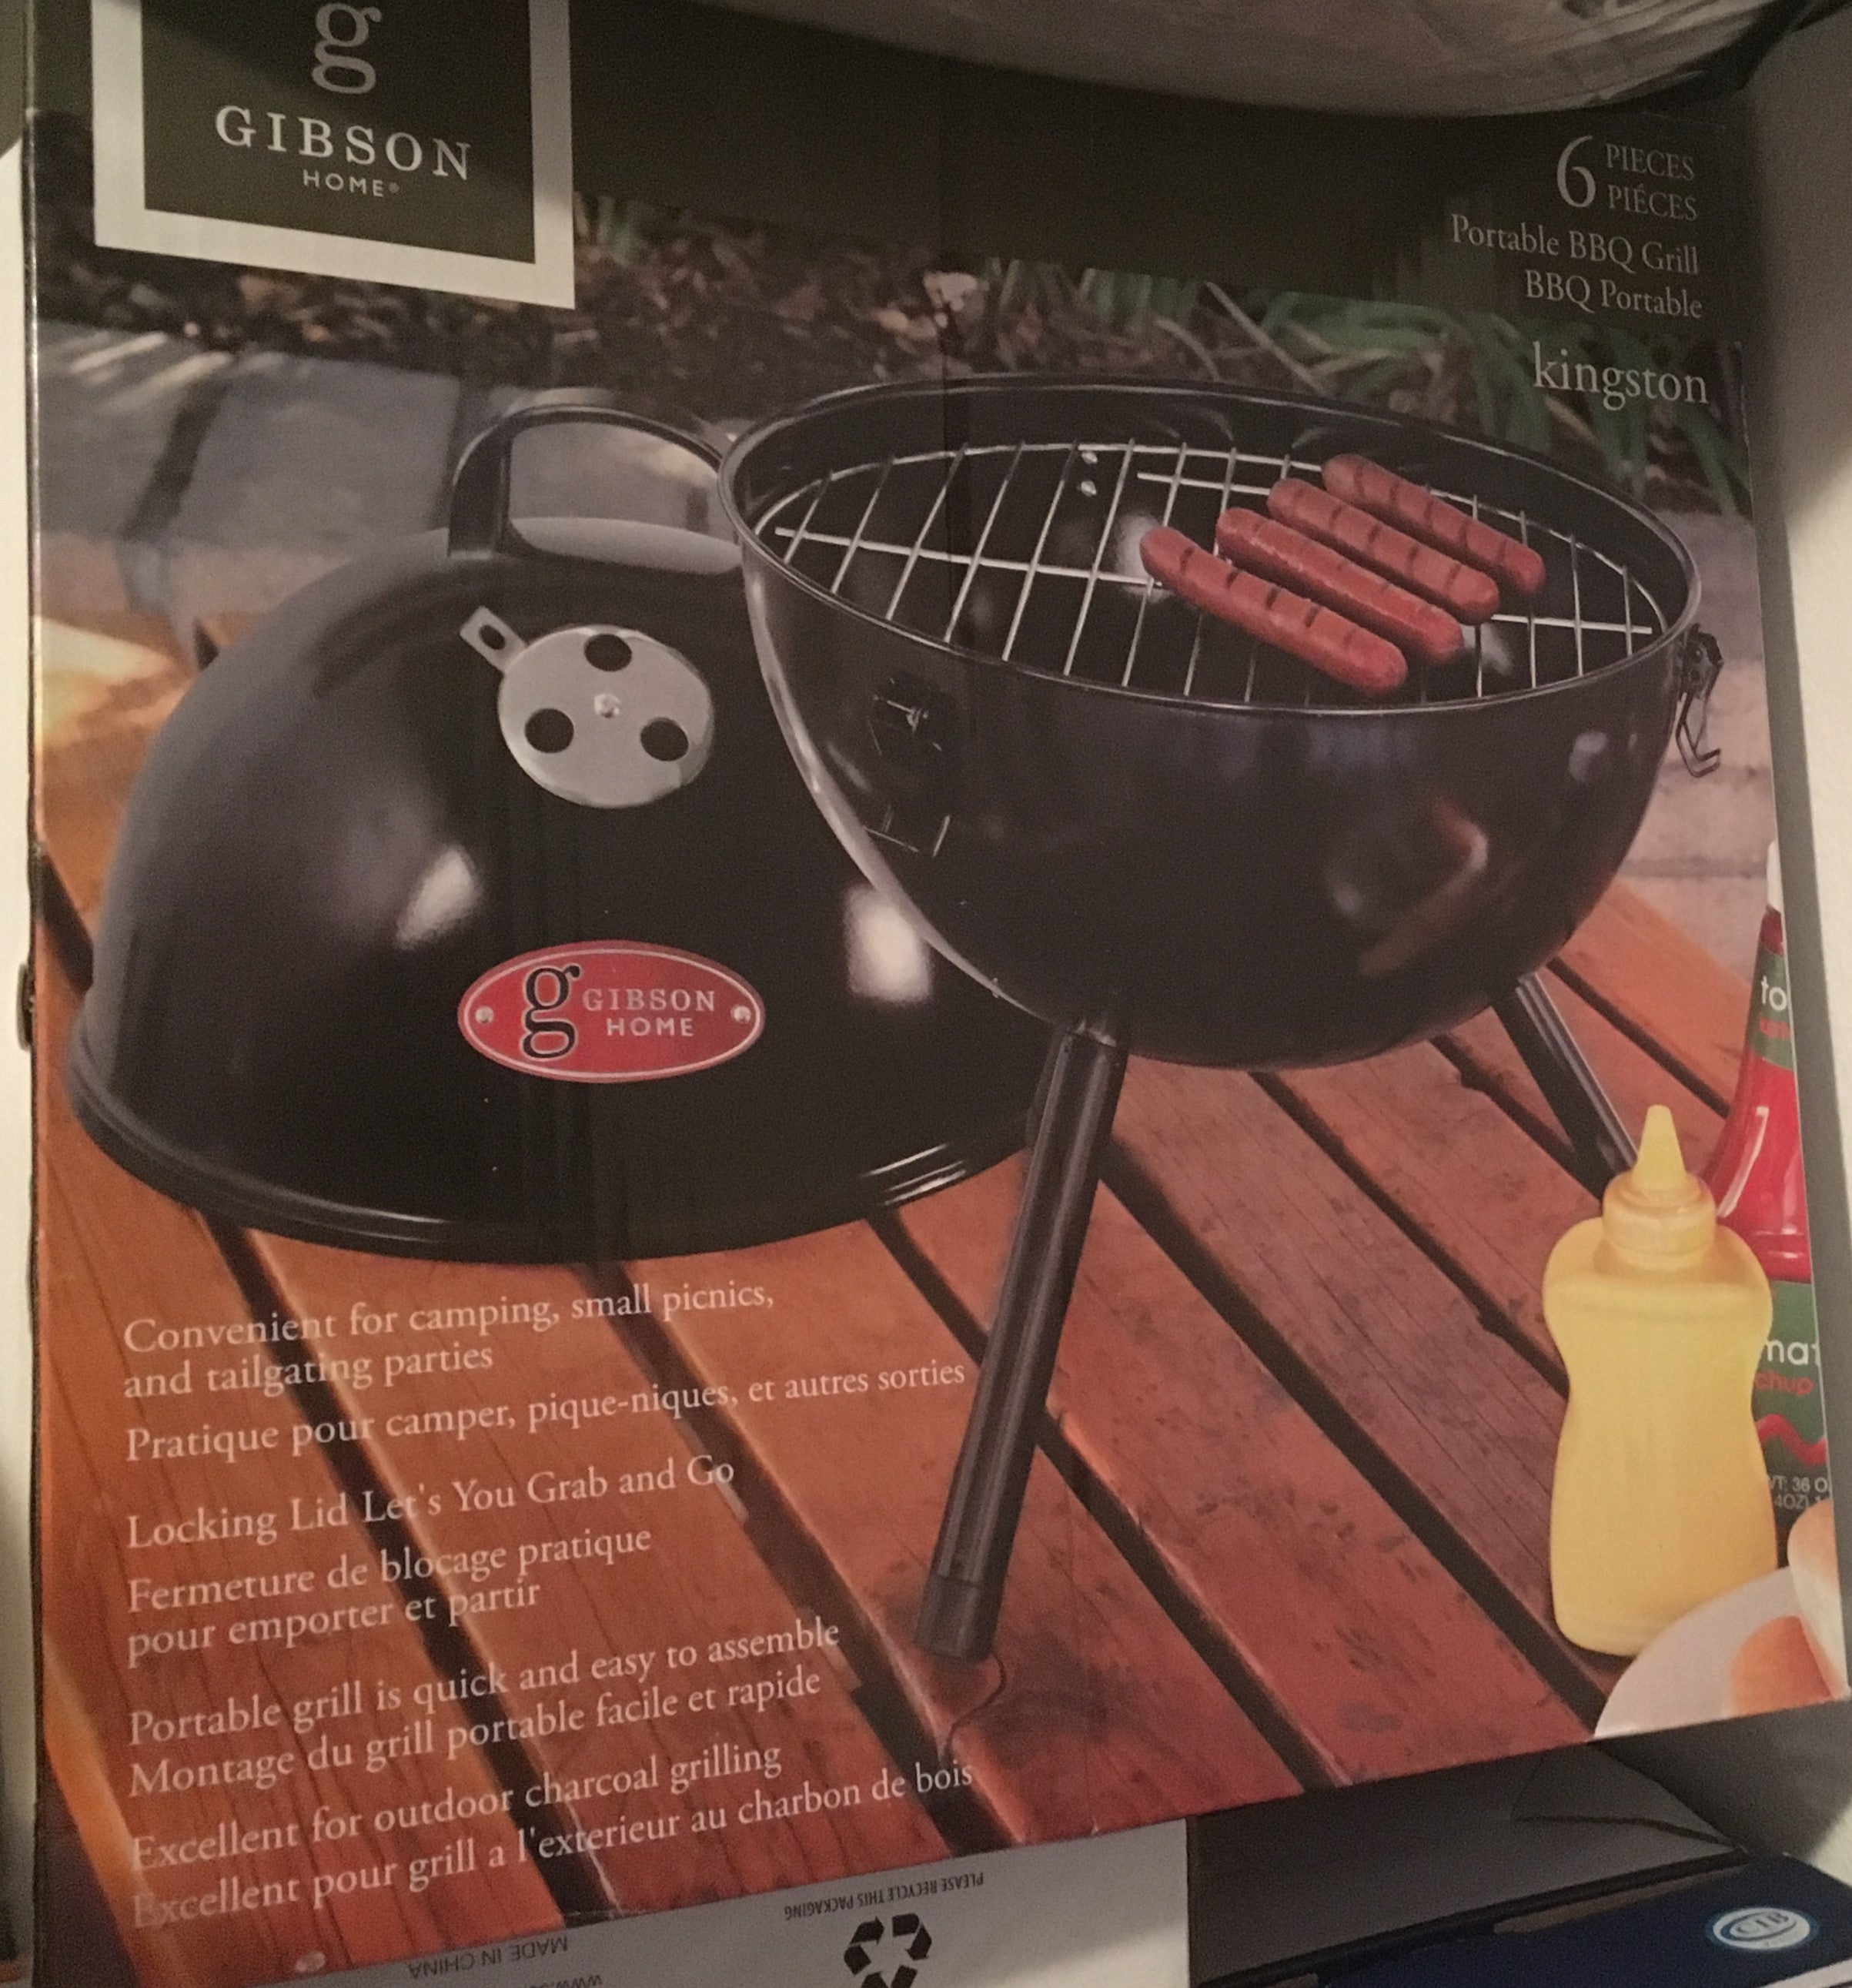 Gibson Kingston 6 Piece BBQ Grill